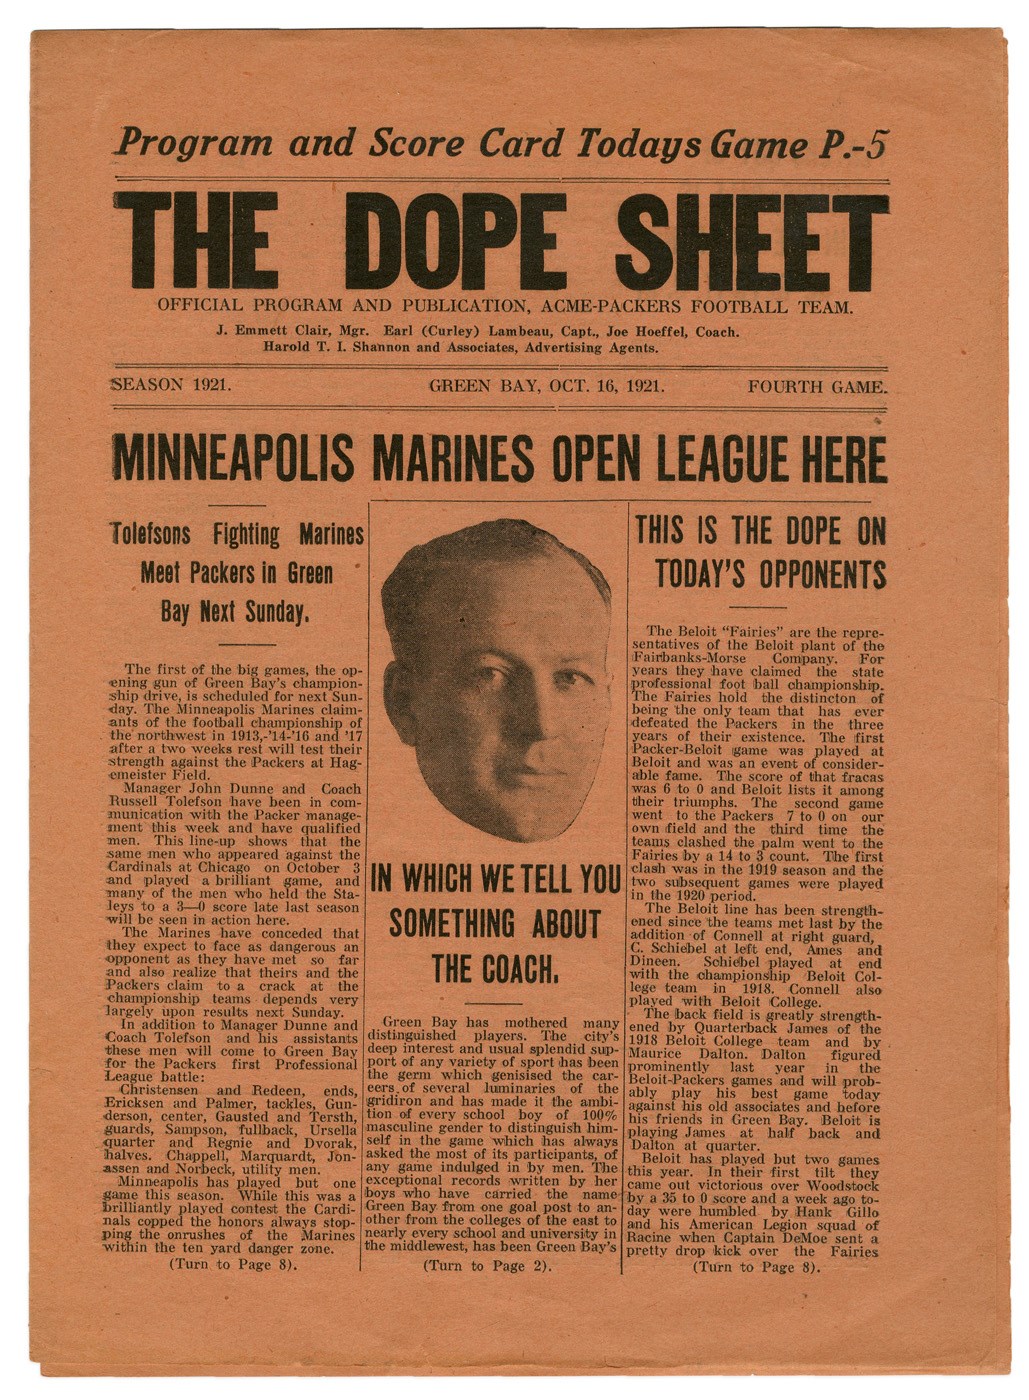 1921 Green Bay Packers Program - Second Ever & One of the Finest Known "Dope Sheets"